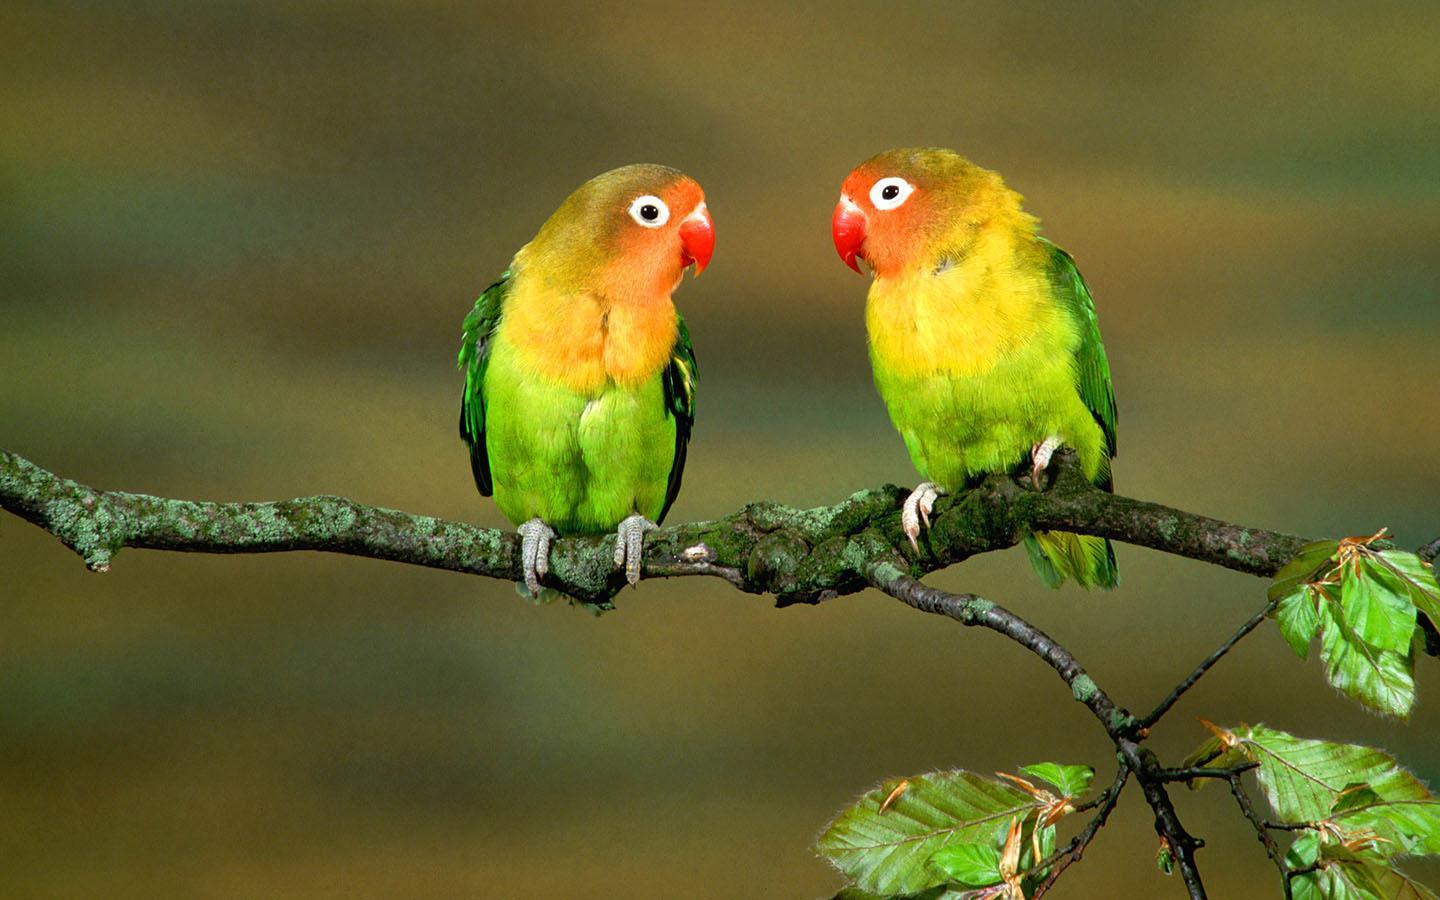 Colorful Parrot Birds Wallpaper, Photos Wallpapers Download